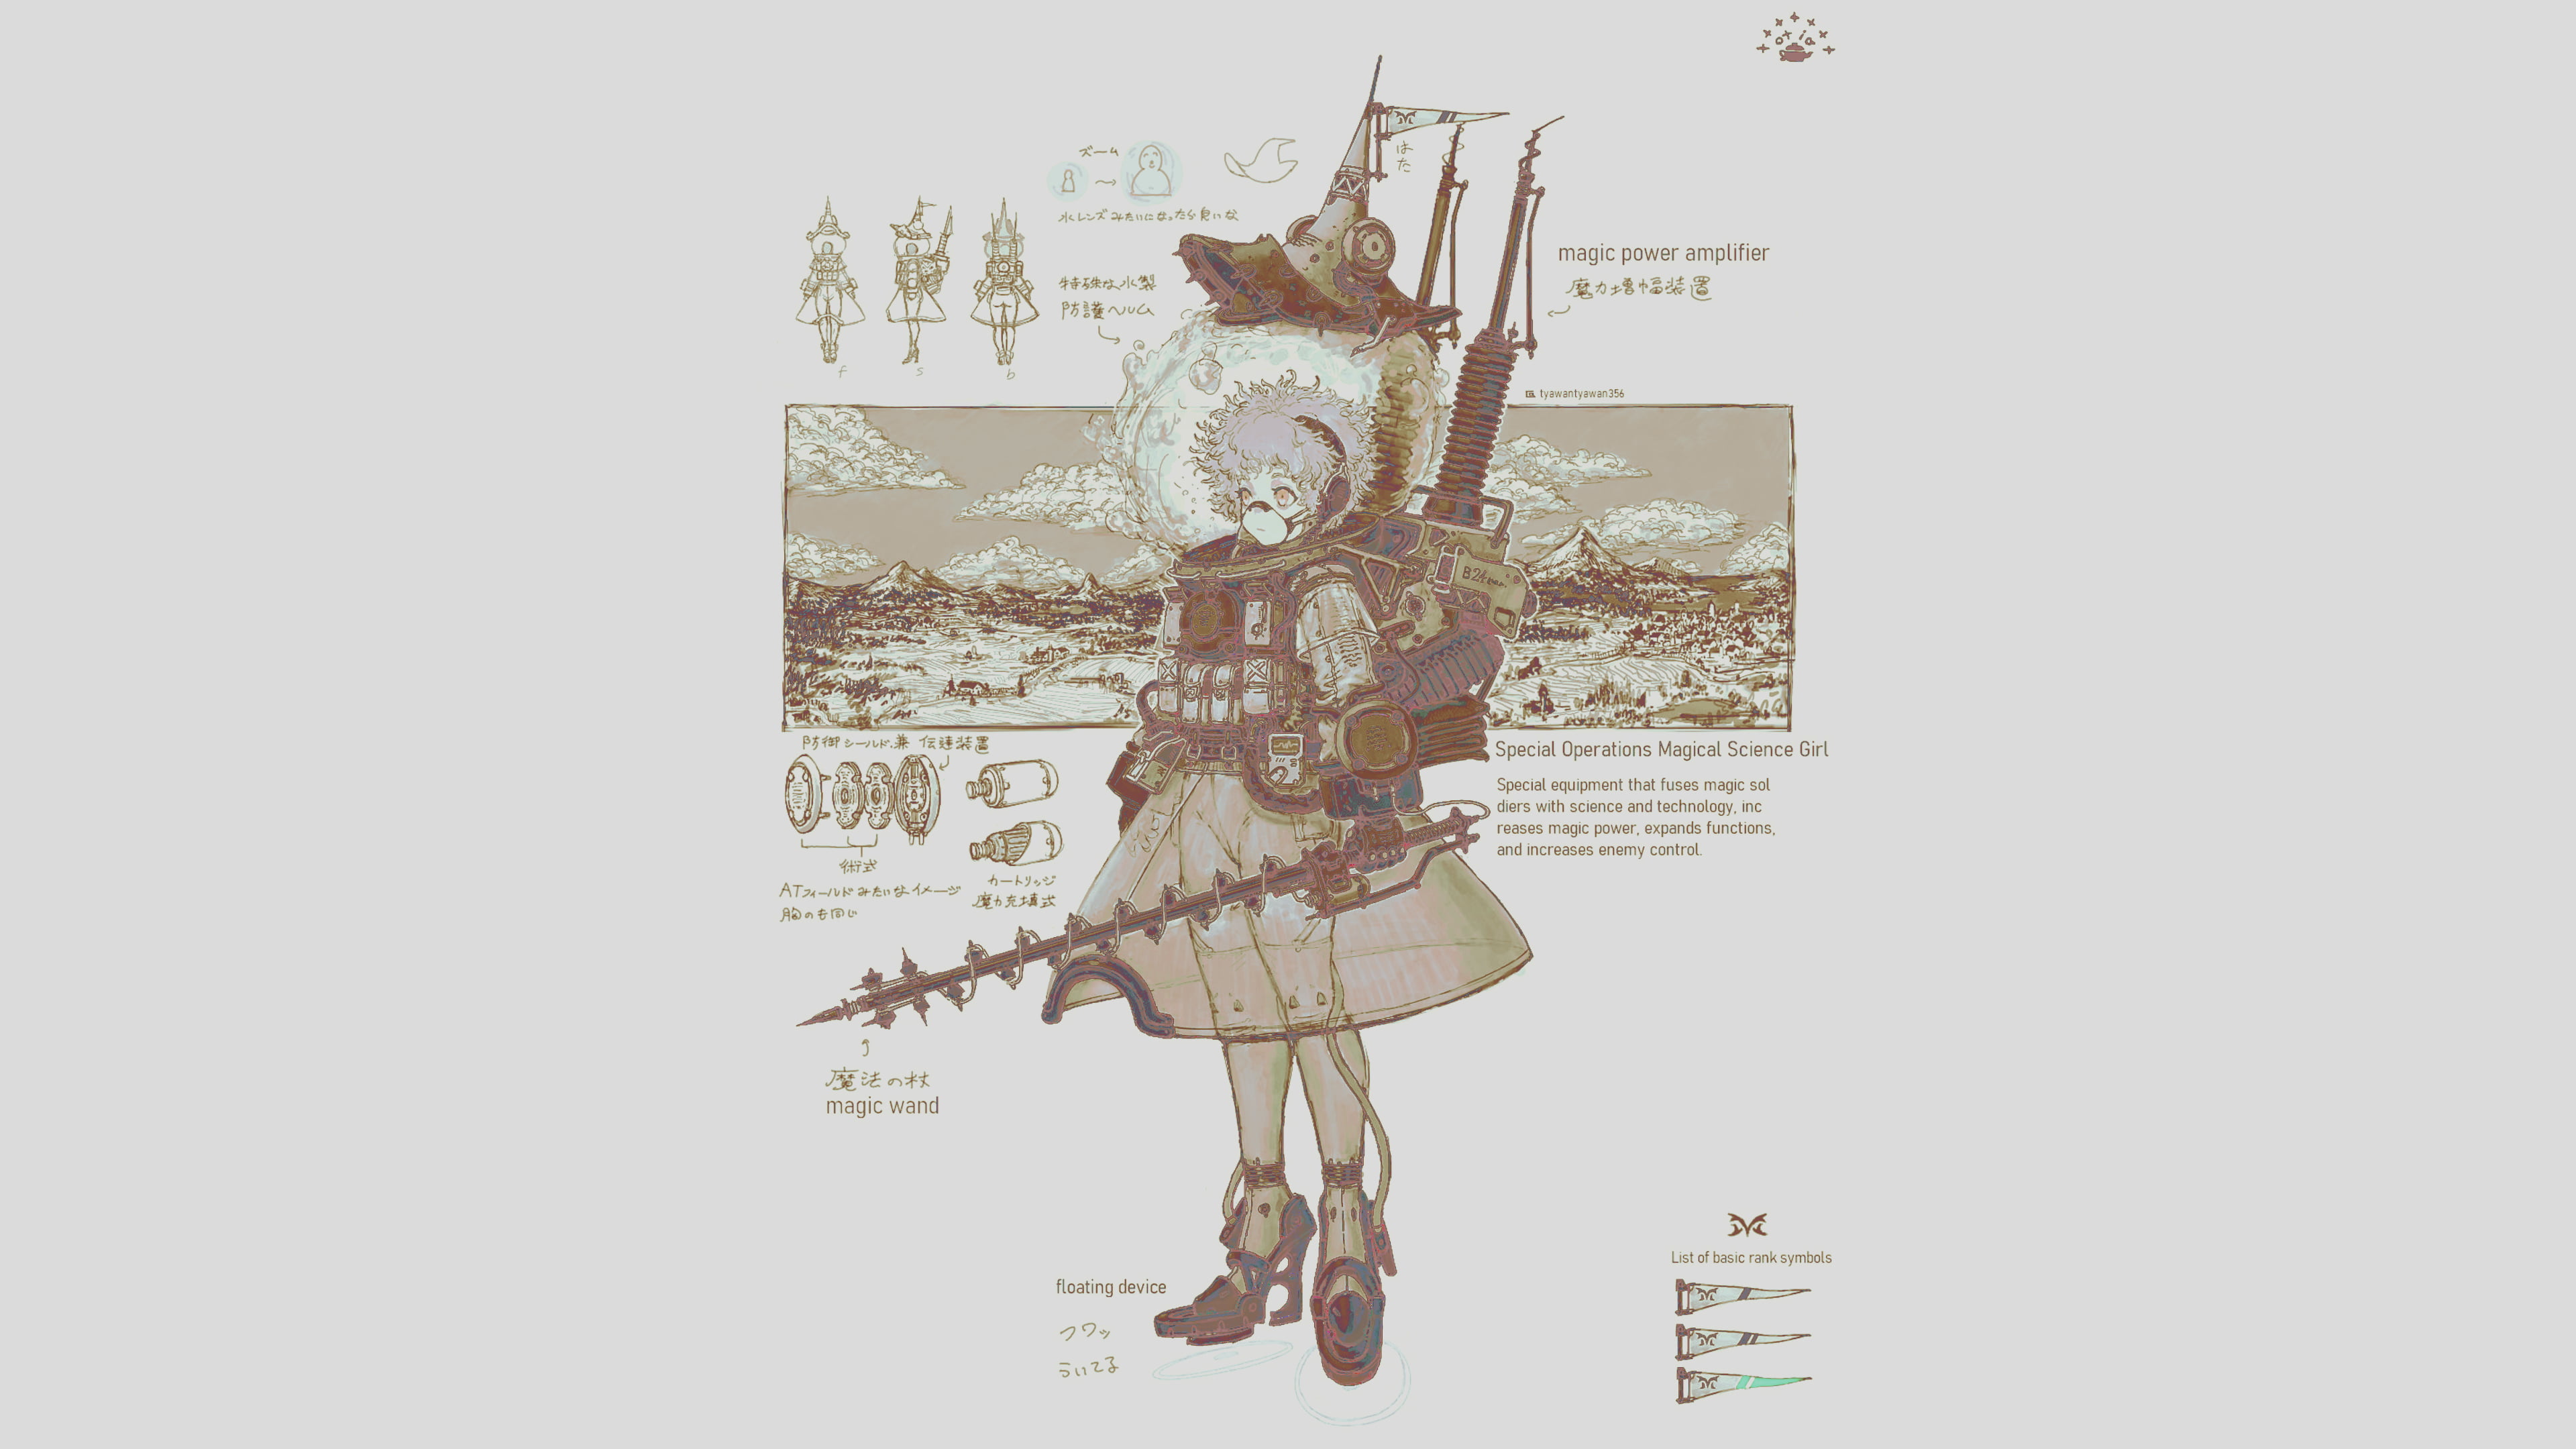 magical girls, science, military, witch, industrial, curly hair